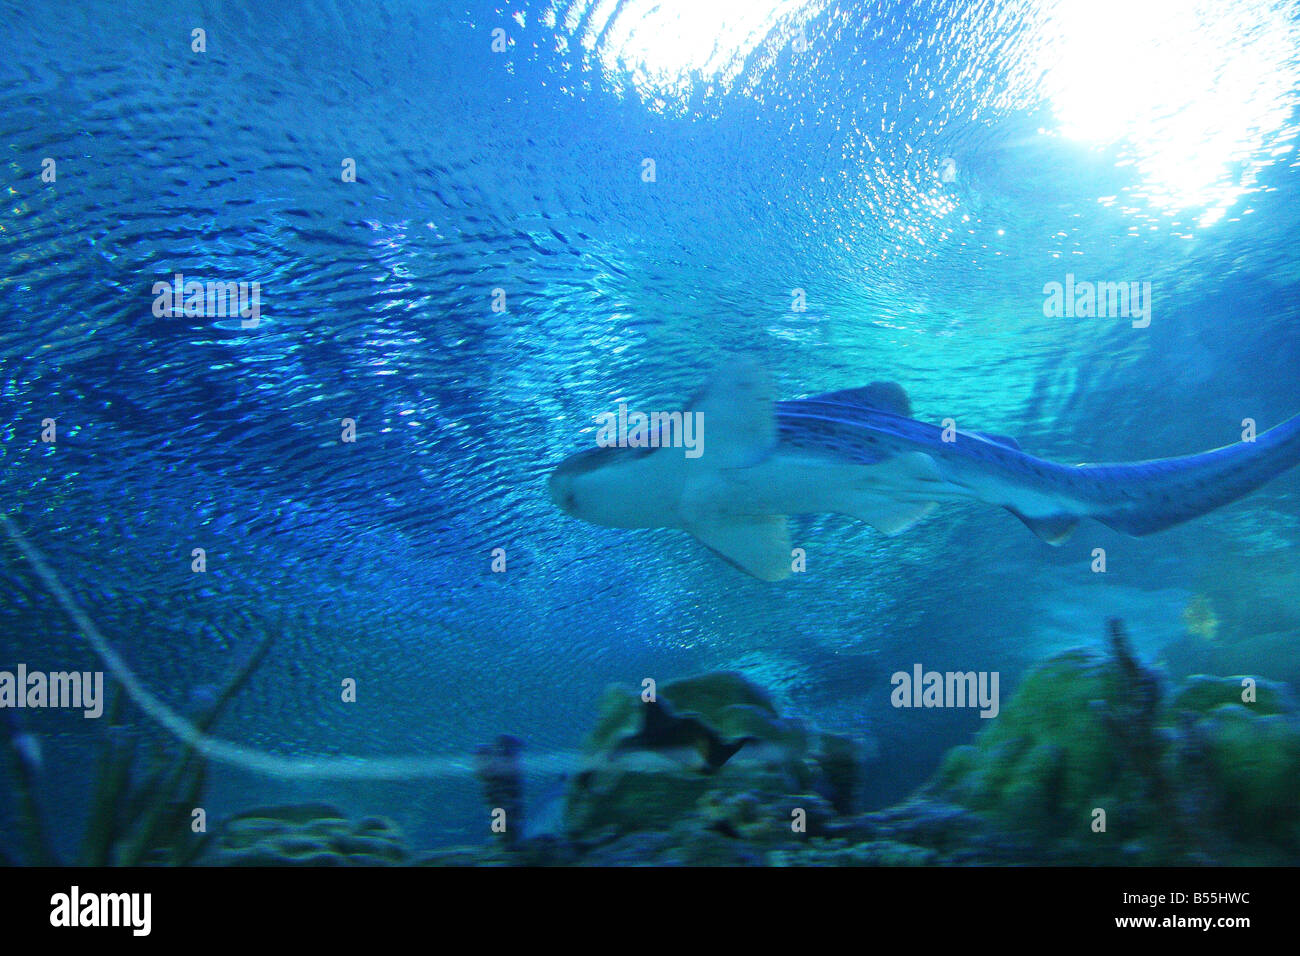 An experience of the underwater world at the KLCC Aquaria located in KLCC, Kuala Lumpur, Malaysia. Stock Photo